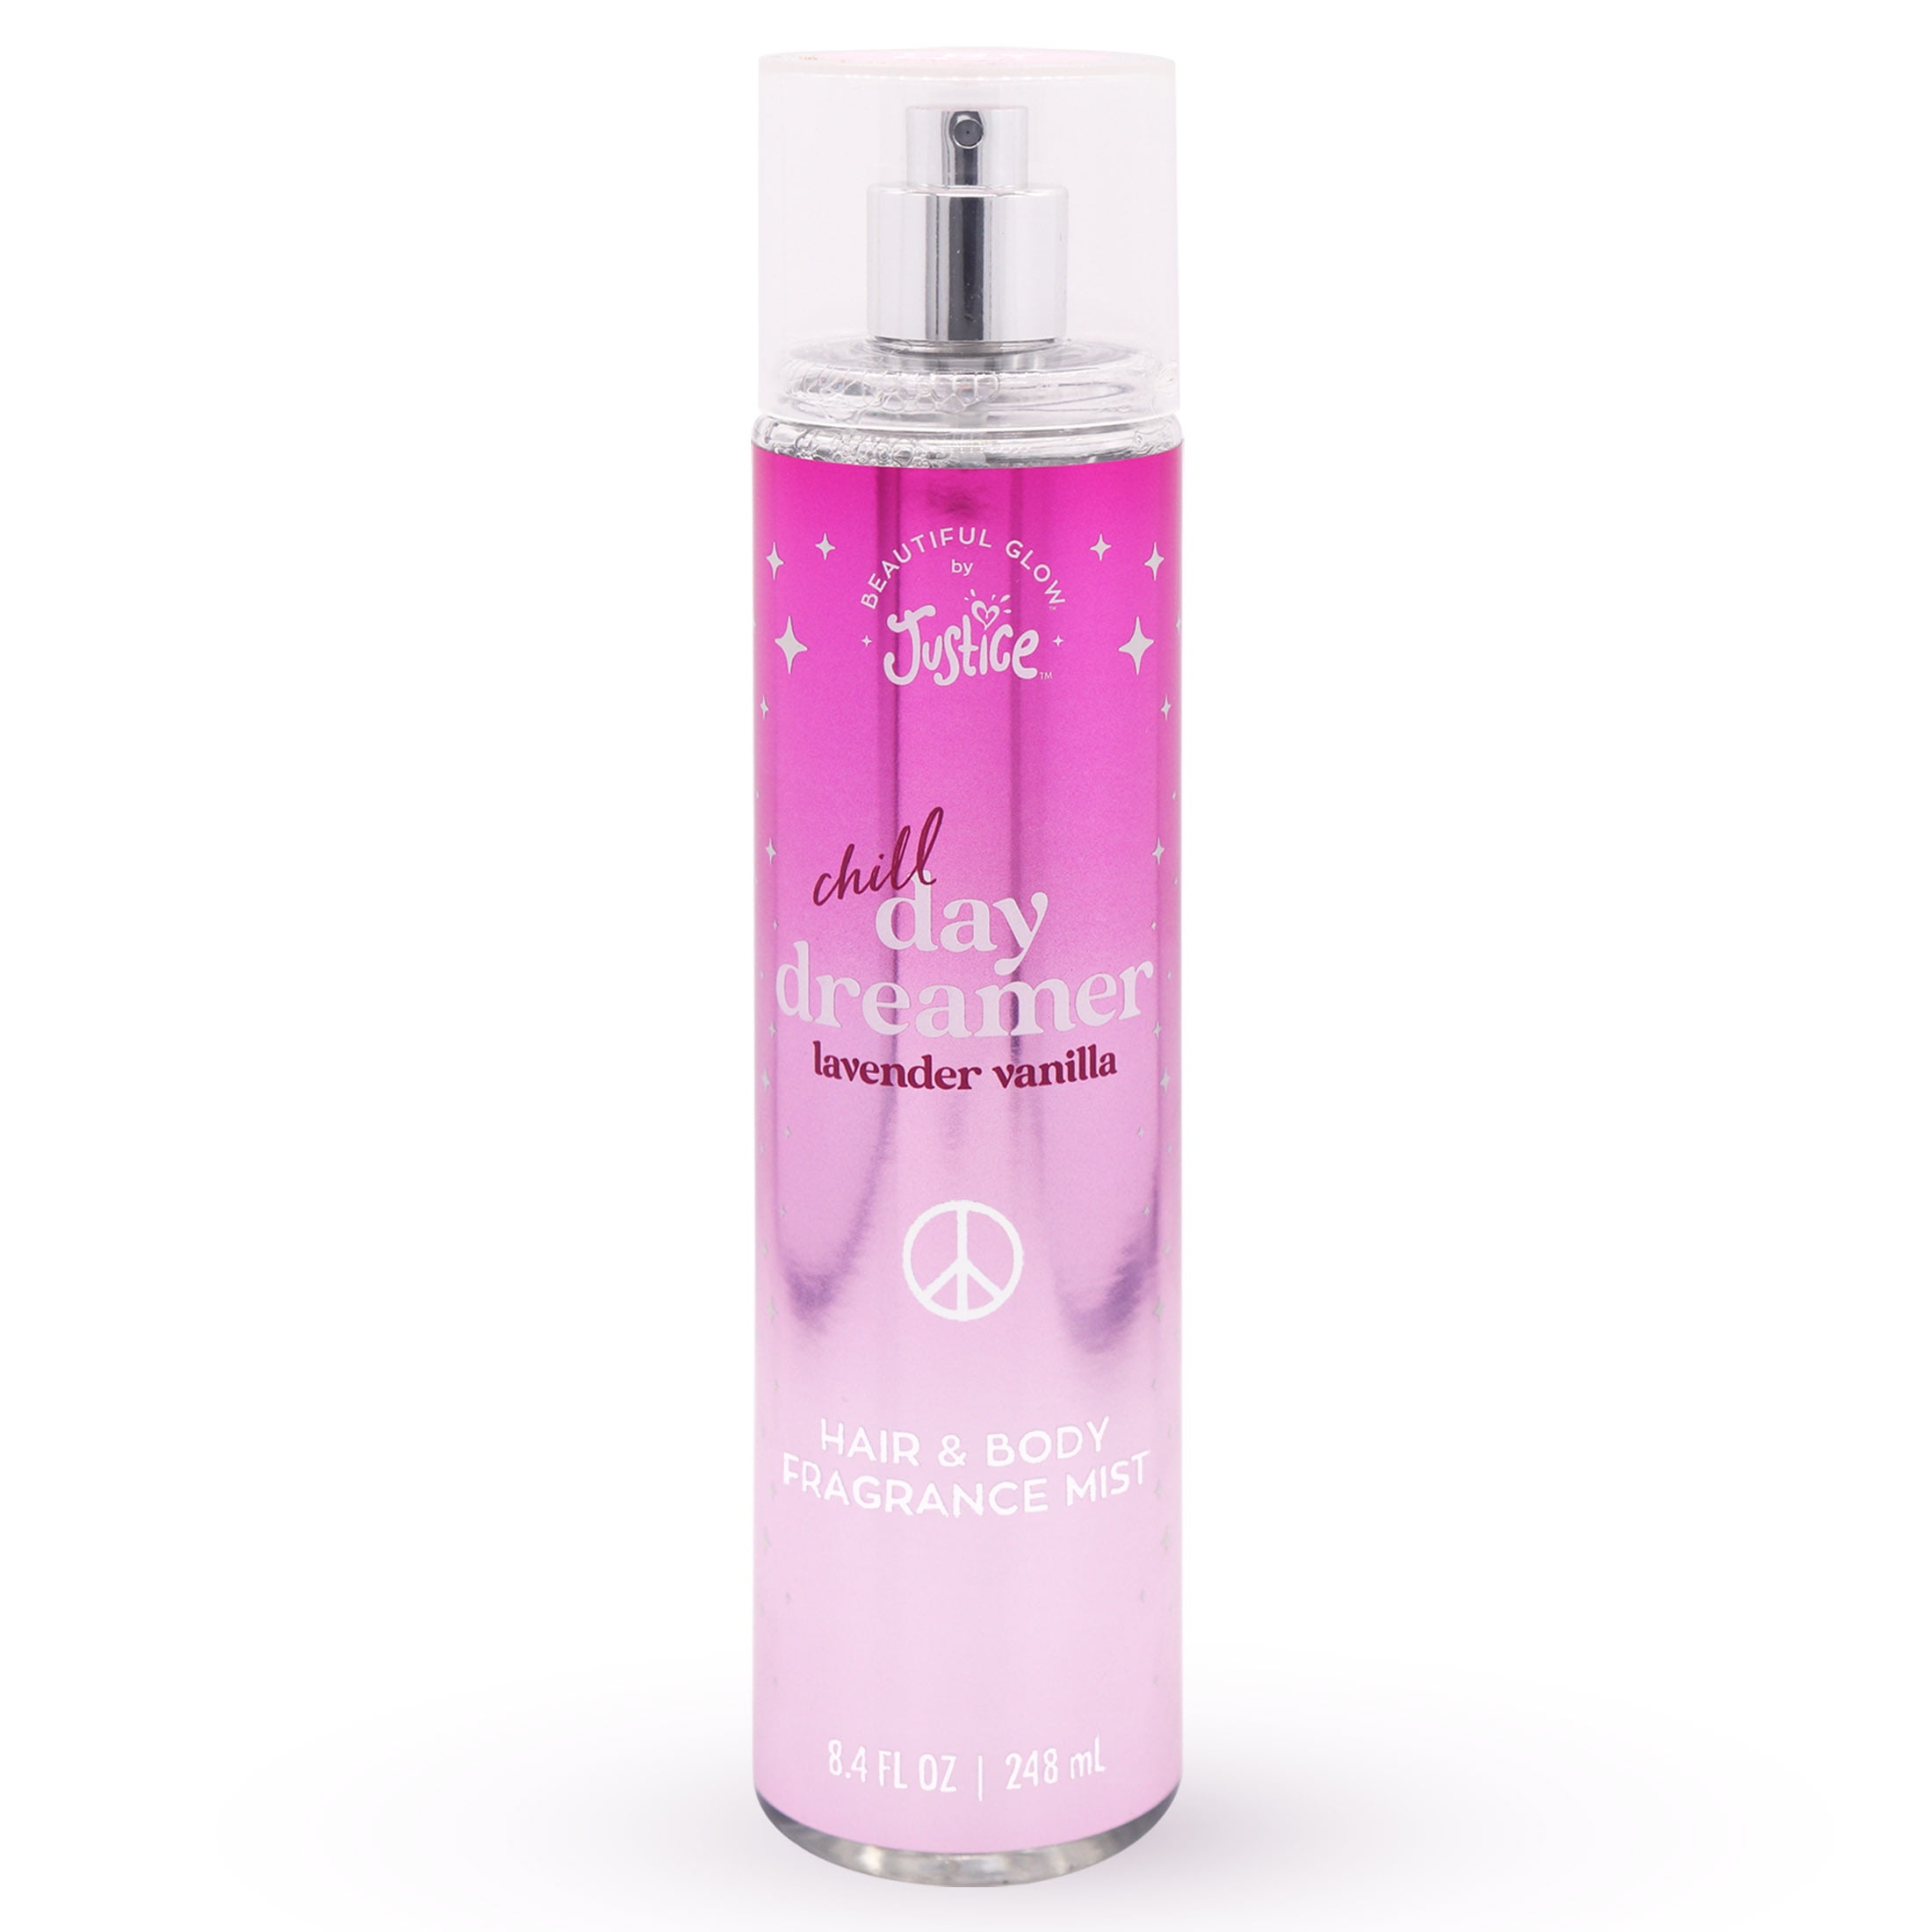 Glow Justice Vanilla, Beautiful by Day and Mist, Body Fragrance Lav Hair Chill Dreamer 8.4 fl oz